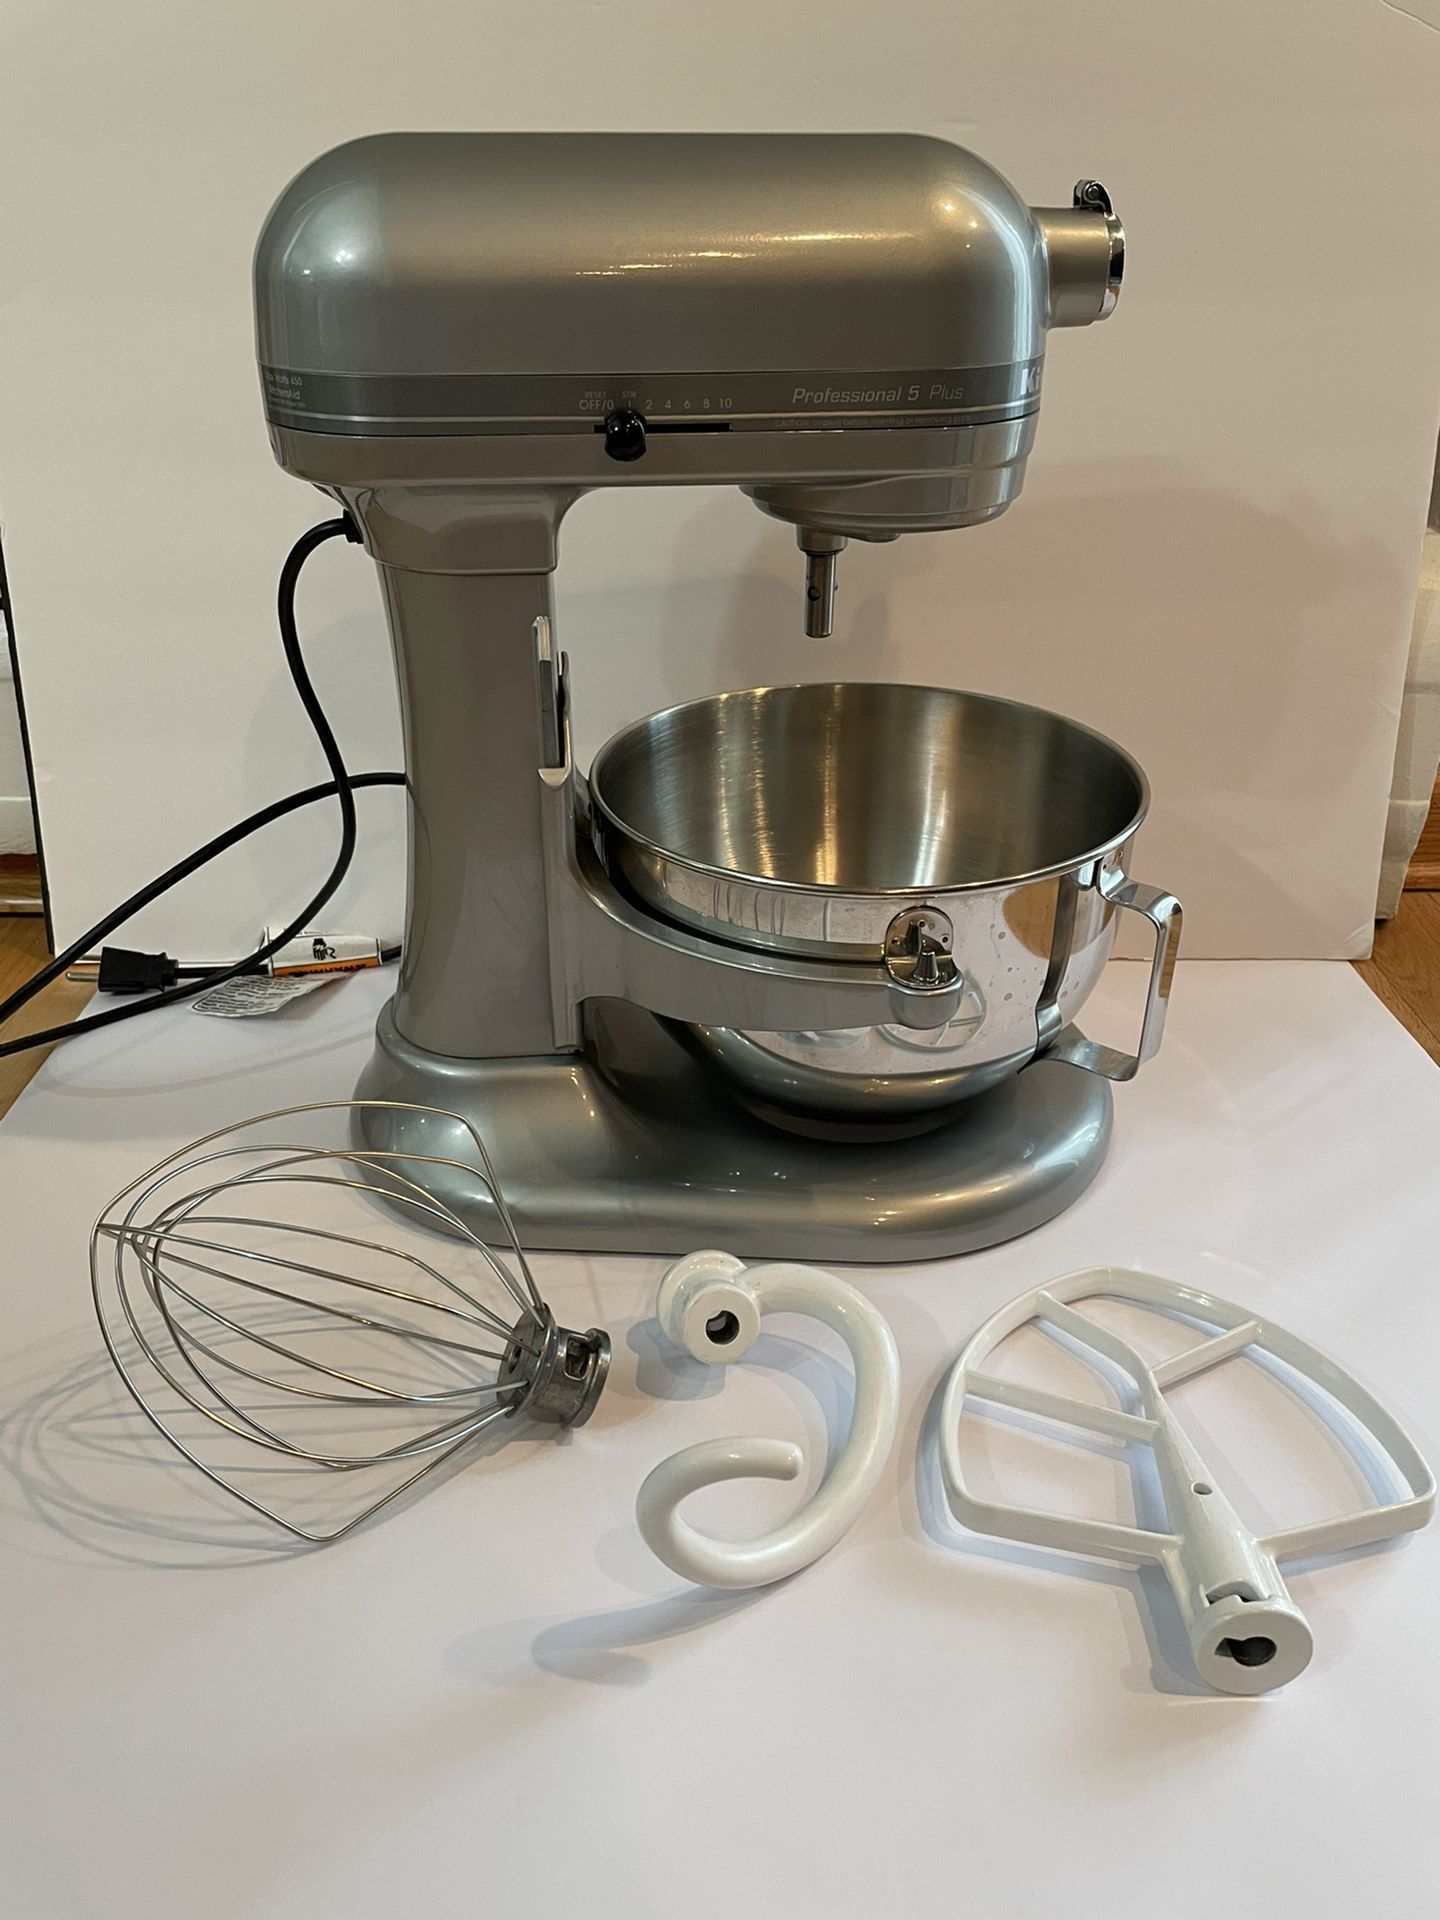 Sold at Auction: Kitchenaid Professional 5 Plus Stand Mixer